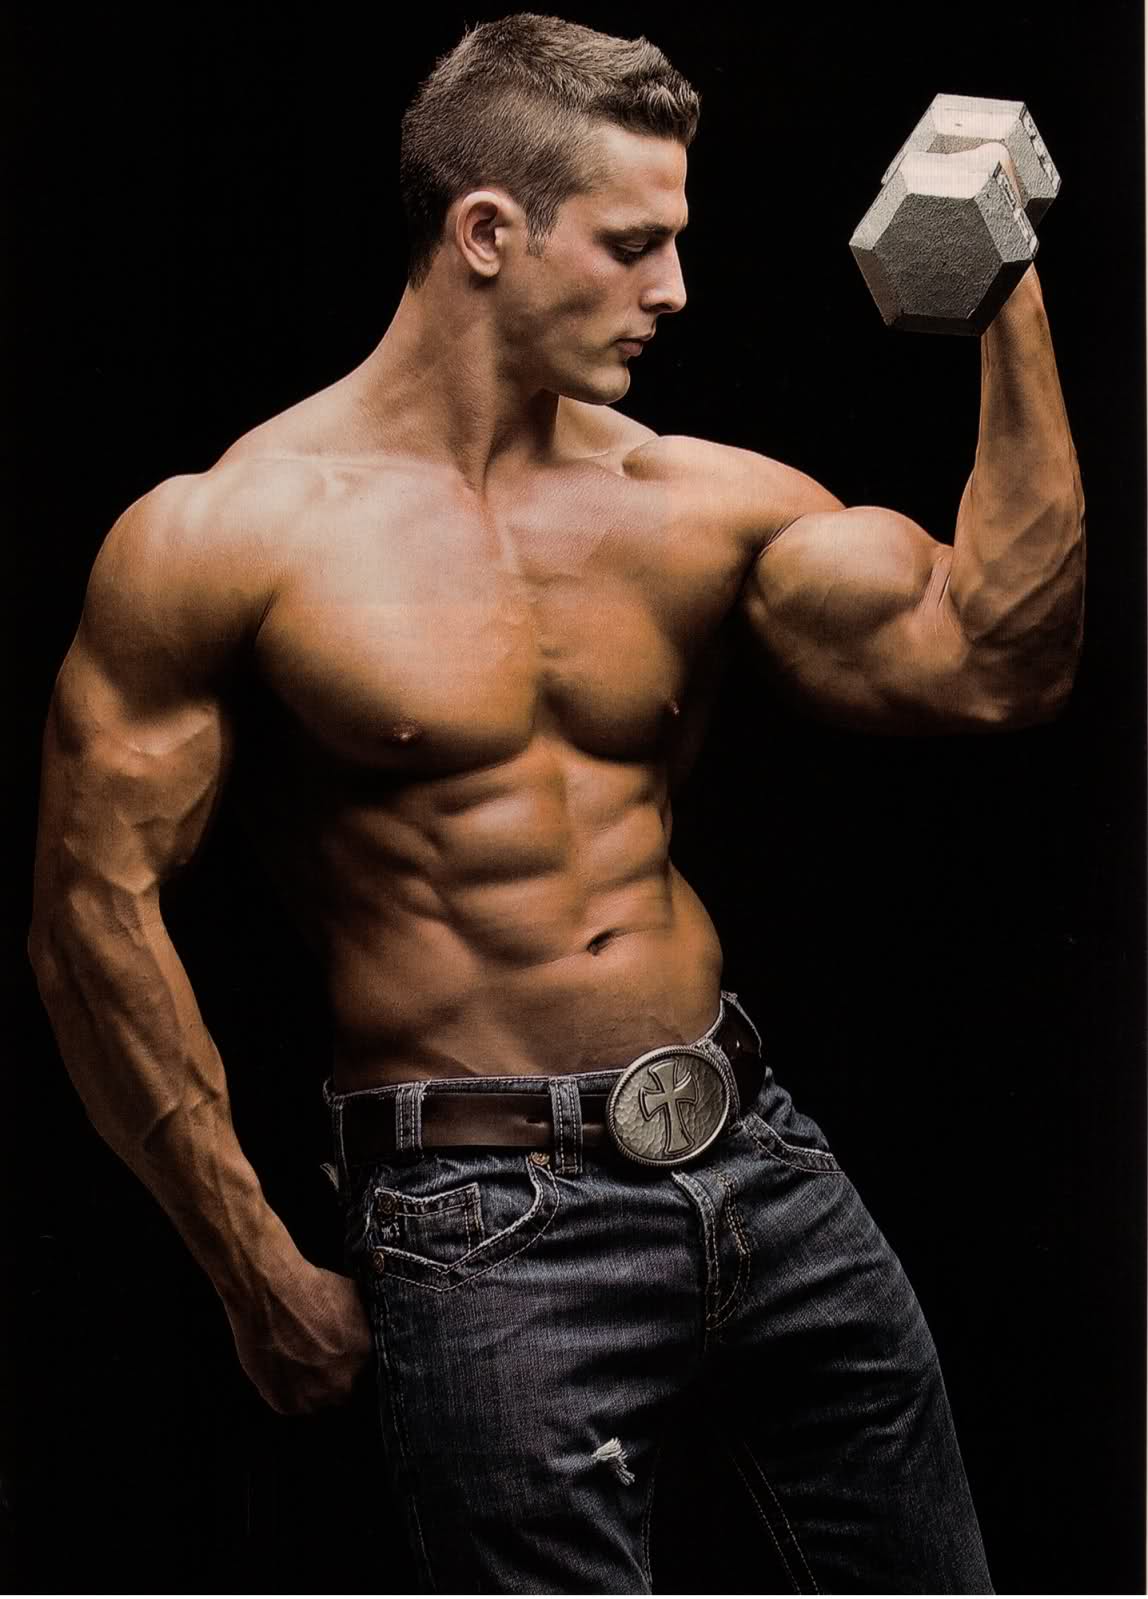 The Secrets Of Bodybuilding Training For Young Athletes - Bodybuilding